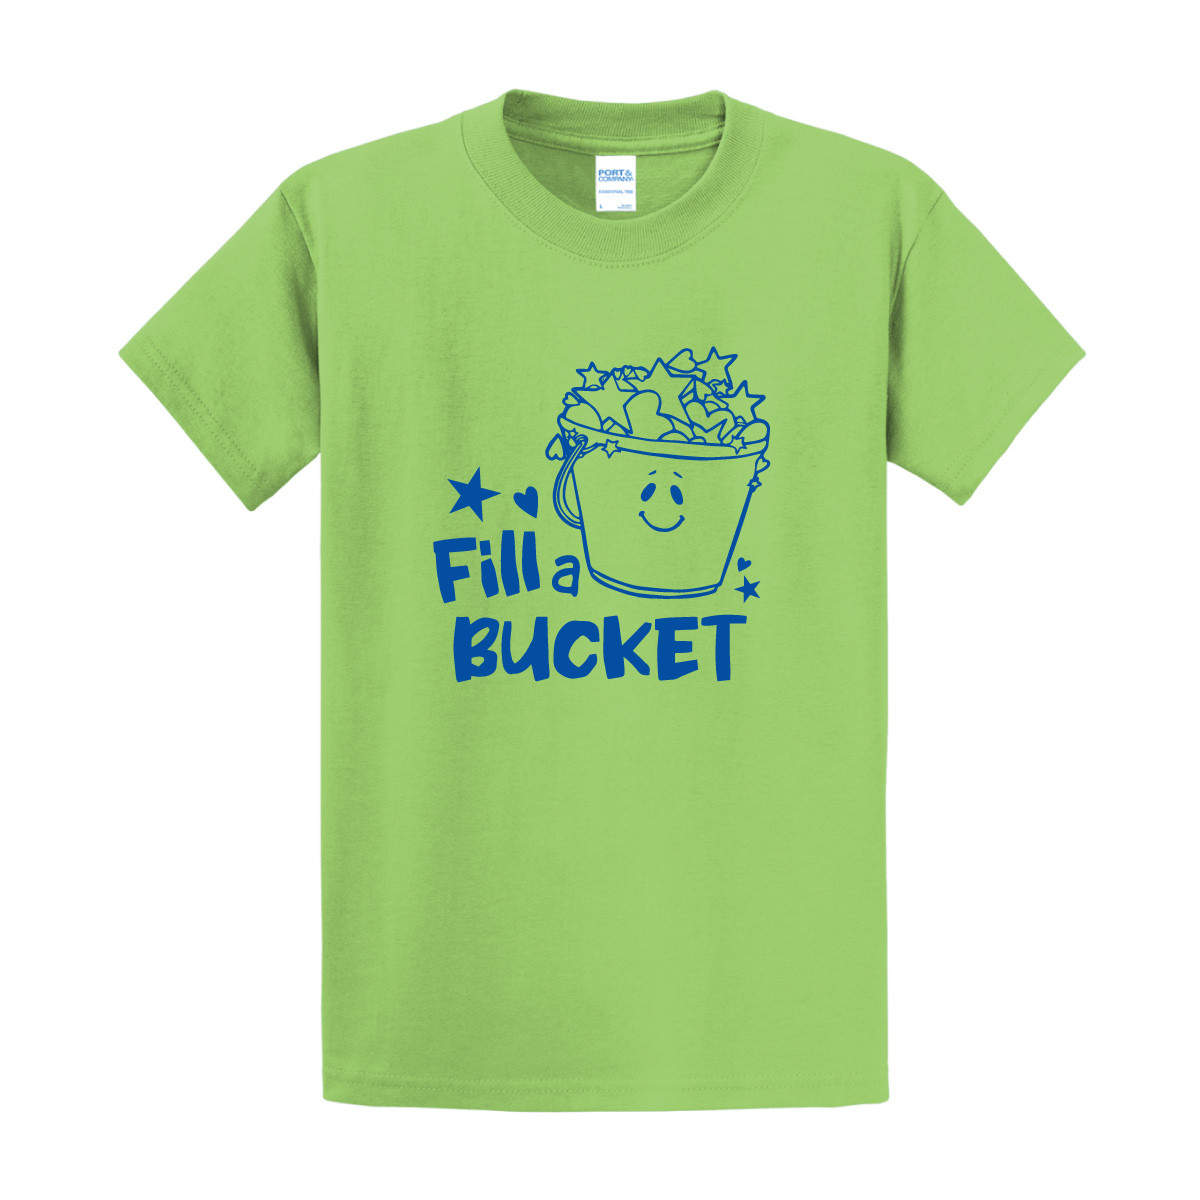 SCREEN PRINTED BUCKET FILLERS  T-SHIRTS